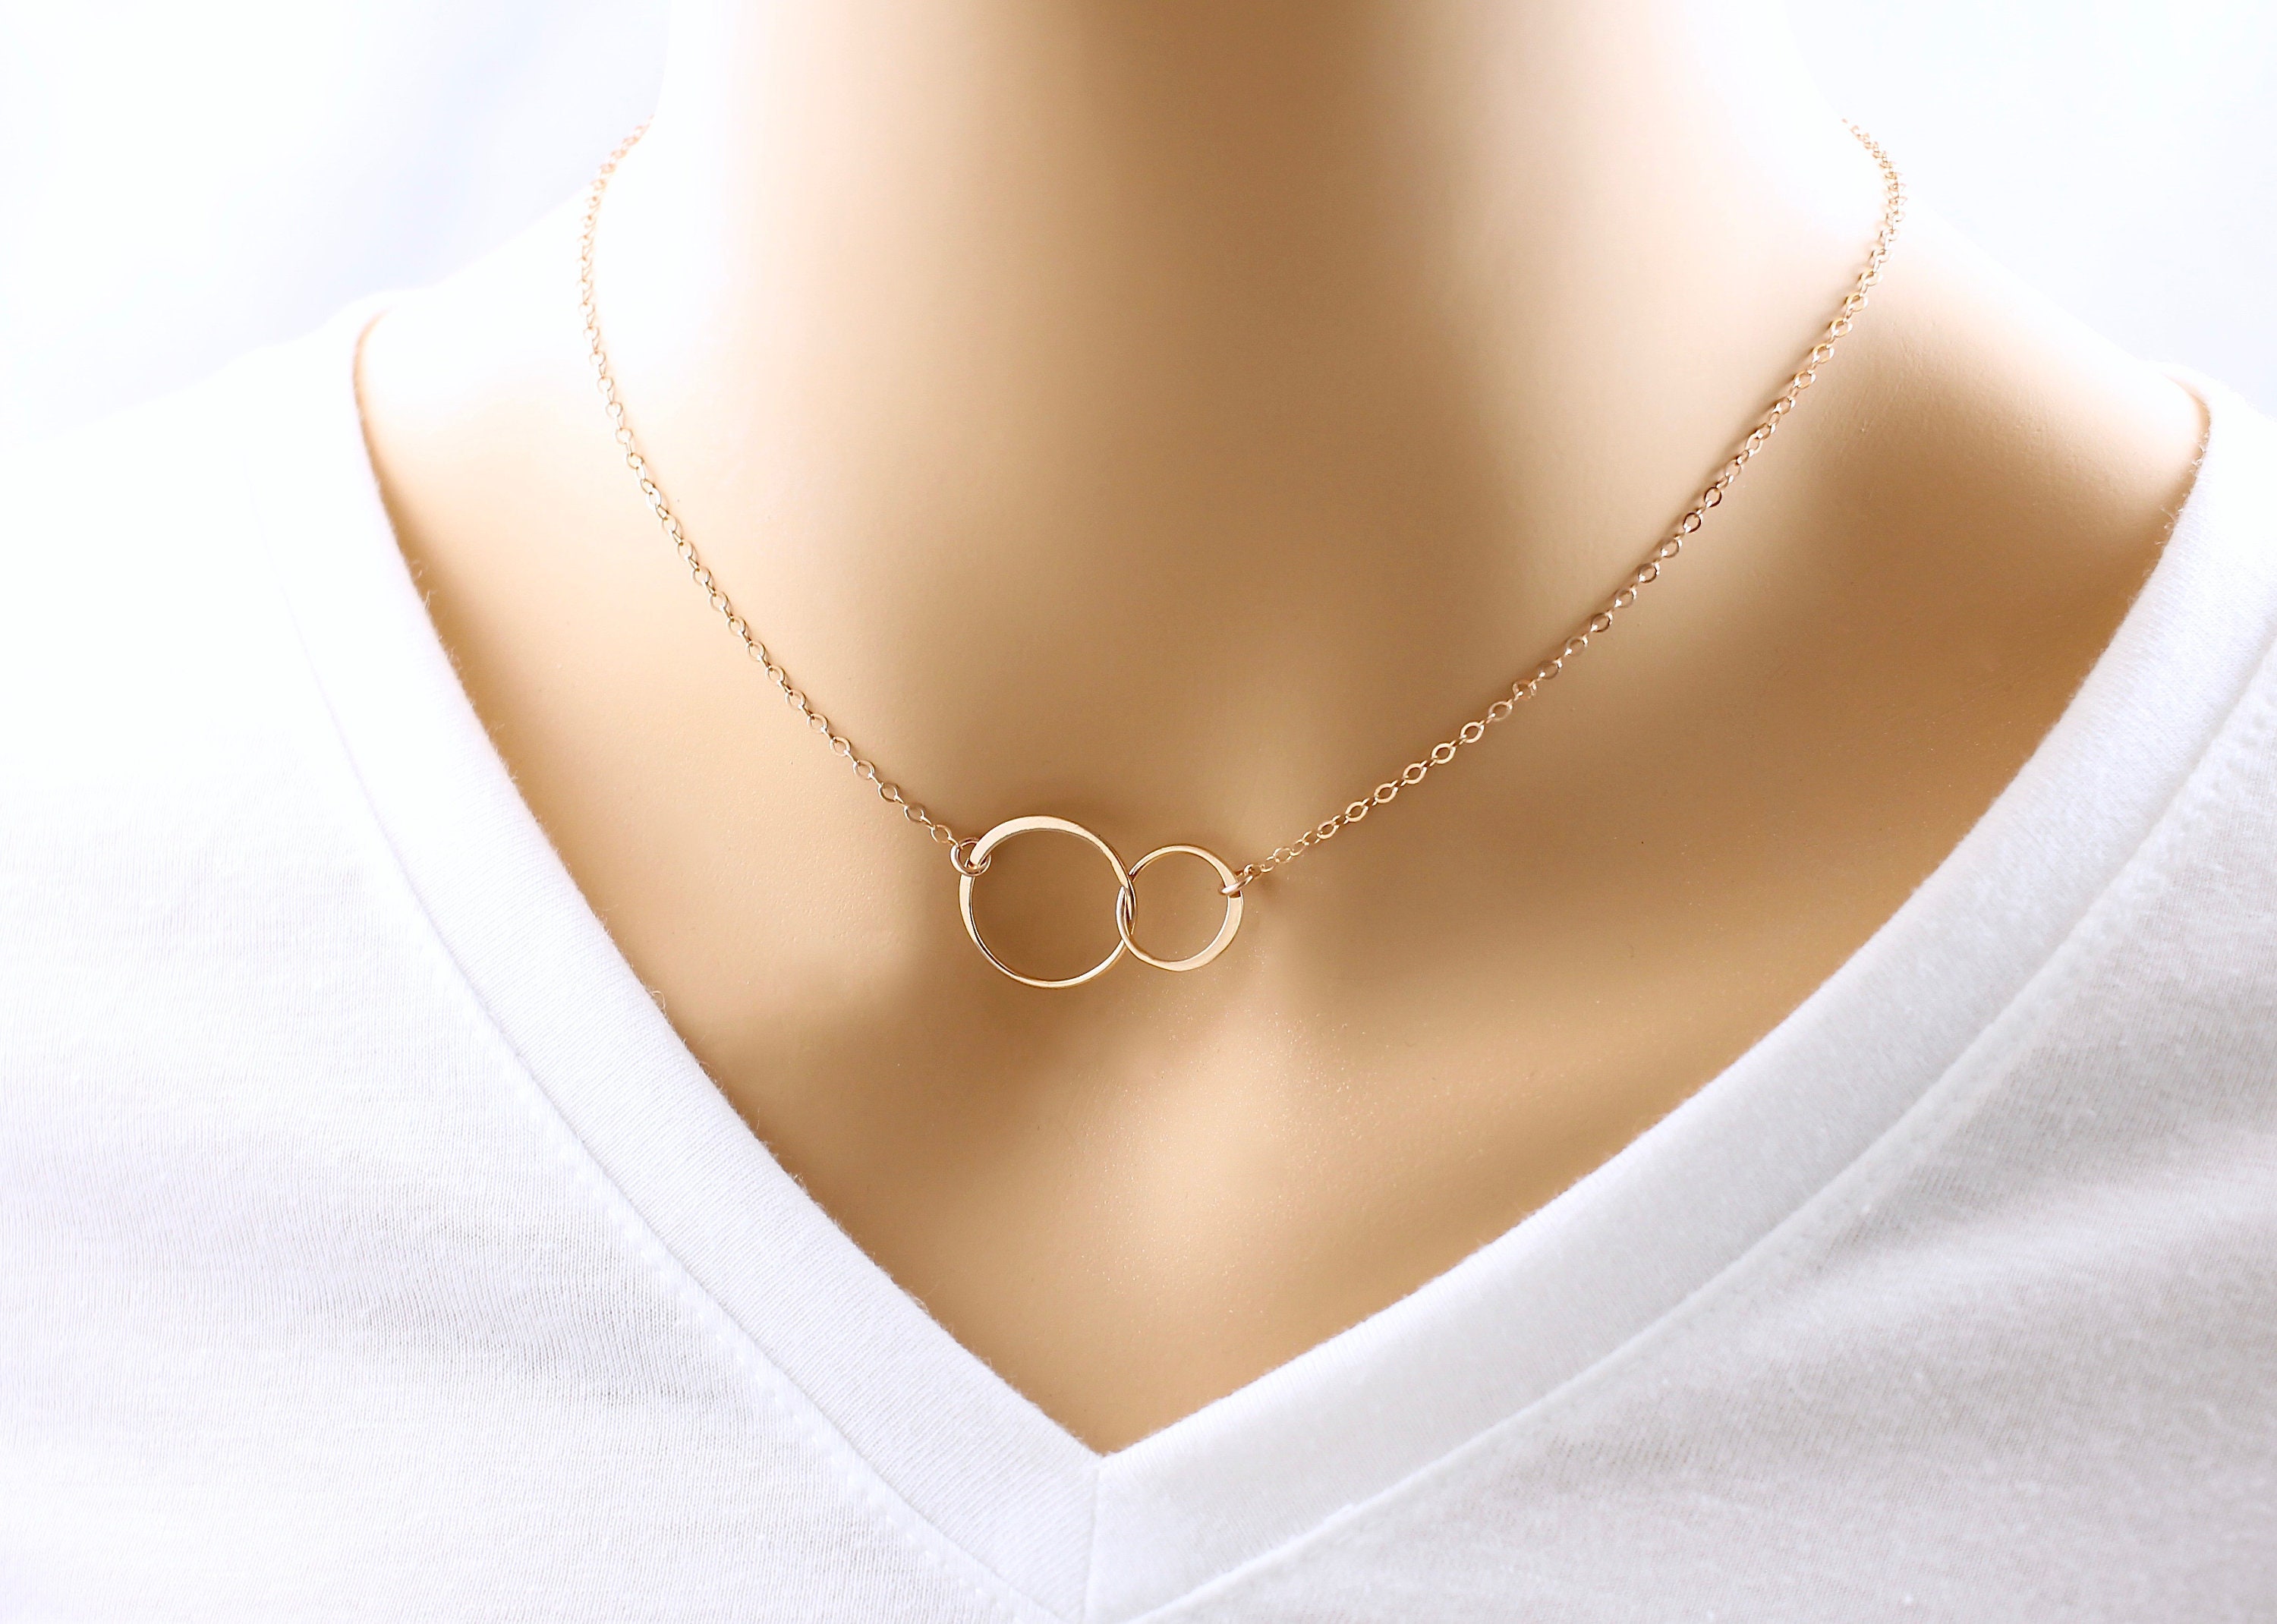 Your Always Charm Mother Daughter Necklace Bracelet,Two Interlocking Infinity Double Circles Jewelry Set 